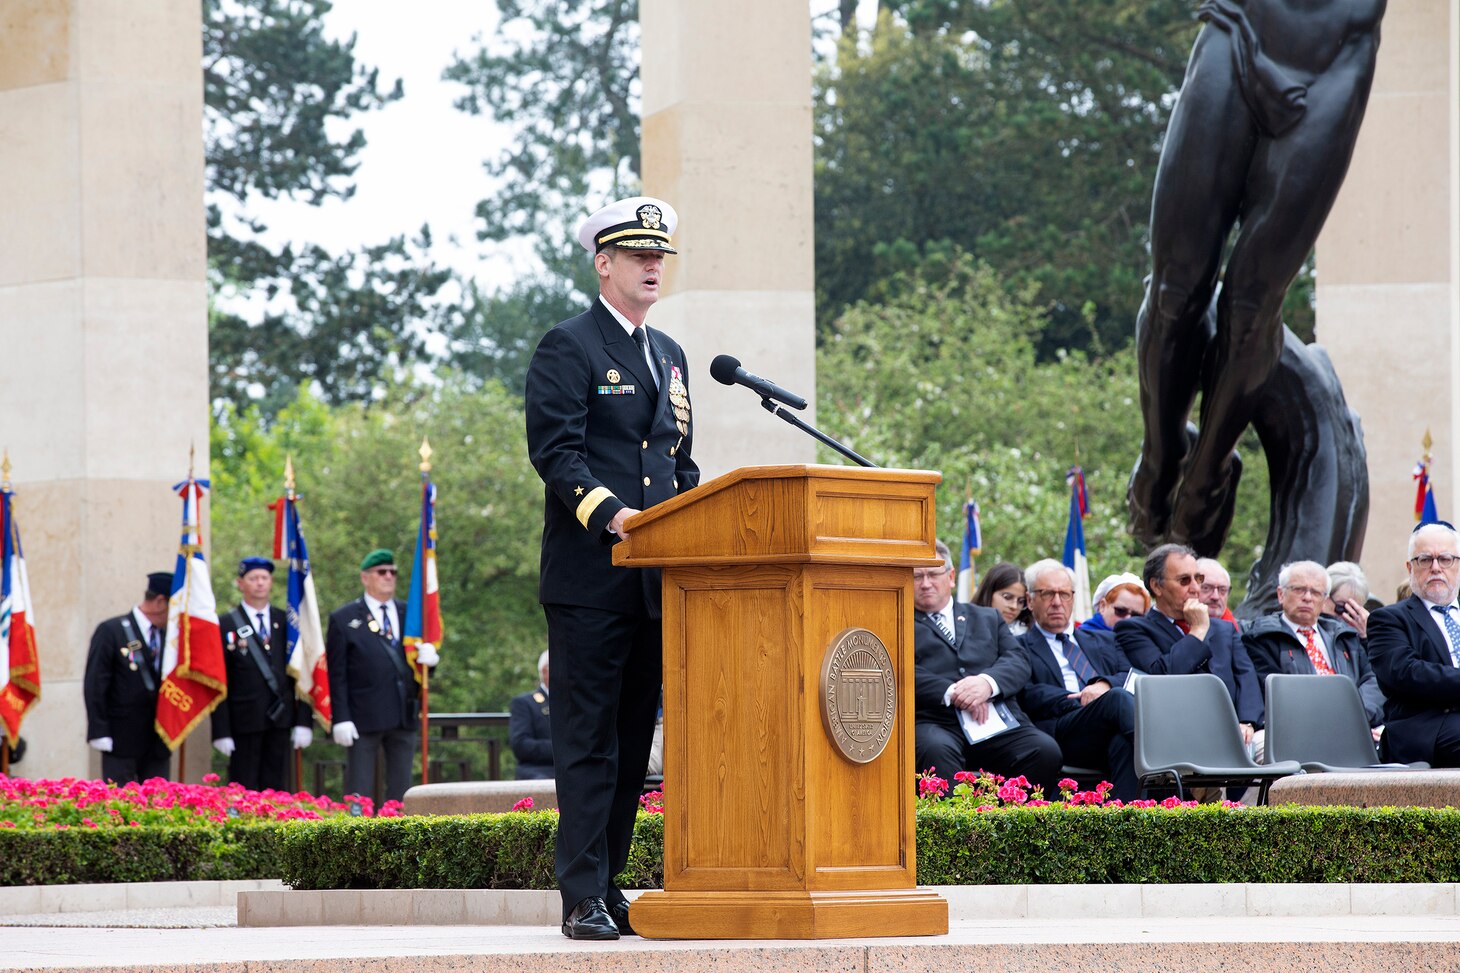 COLLEVILLE-SUR-MER, France - Rear Adm. Oliver T. Lewis, Director of Maritime Operations, U.S. Naval Forces Europe-Africa / U.S. Sixth Fleet, delivers keynote remarks at the Memorial Day commemoration ceremony honoring the American servicemembers that died in the invasion of Normandy, at the Normandy American Cemetery and Memorial in Colleville-sur-Mer, France, May 28, 2023. Admirals from U.S. Naval Forces Europe-Africa, U.S. Sixth Fleet, and EURAFCENT, traveled throughout Europe visiting American Battle Monuments Commission cemeteries to honor the lives and legacies of fallen U.S. and allied service members that paid the ultimate sacrifice in the service of their countries. Headquartered in Naples, Italy, NAVEUR-NAVAF operates U.S. naval forces in the U.S. European Command (USEUCOM) and U.S. Africa Command (USAFRICOM) areas of responsibility. U.S. Sixth Fleet is permanently assigned to NAVEUR-NAVAF and employs maritime forces through the full spectrum of joint and naval operations.